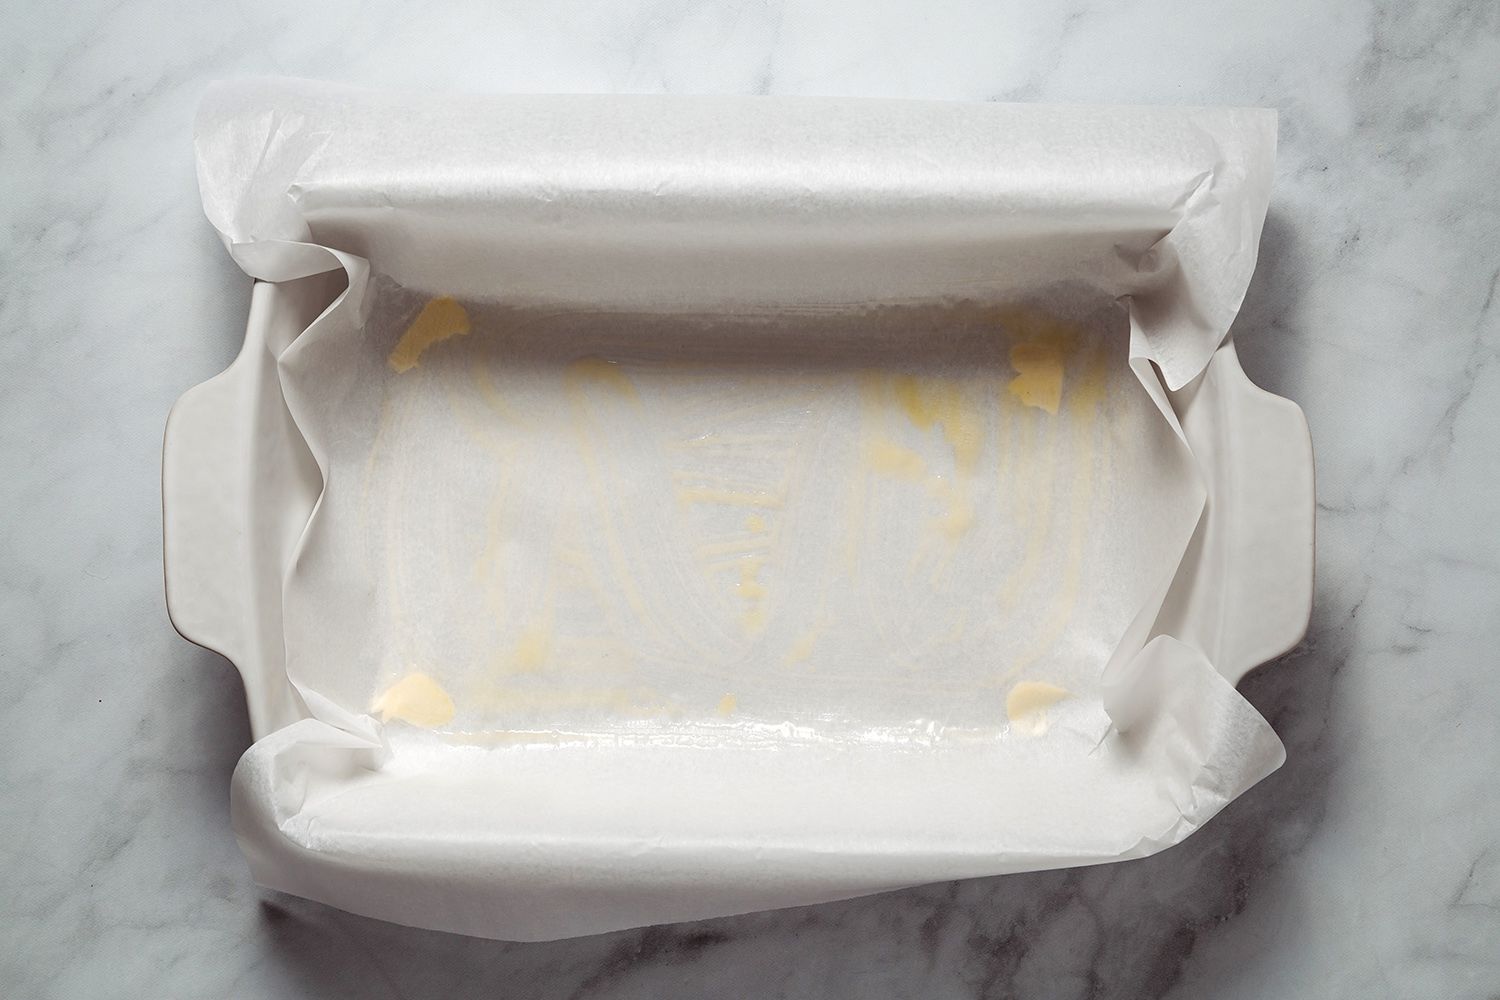 Greased and parchment paper lined baking dish 